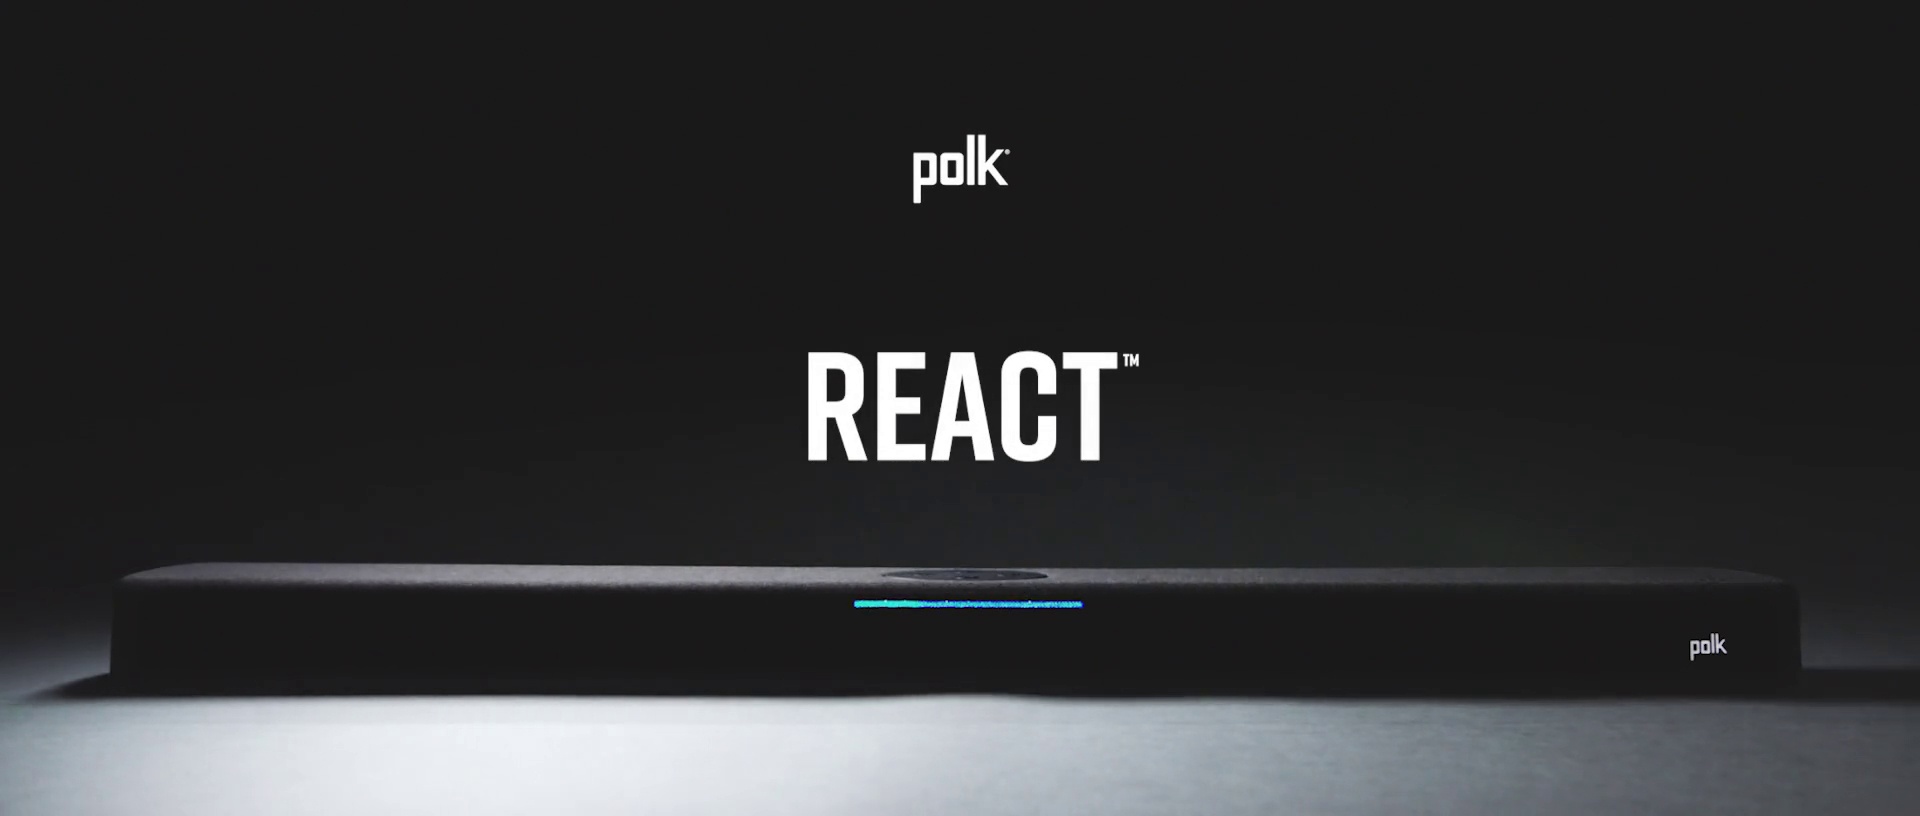 Polk React Product Overview v6